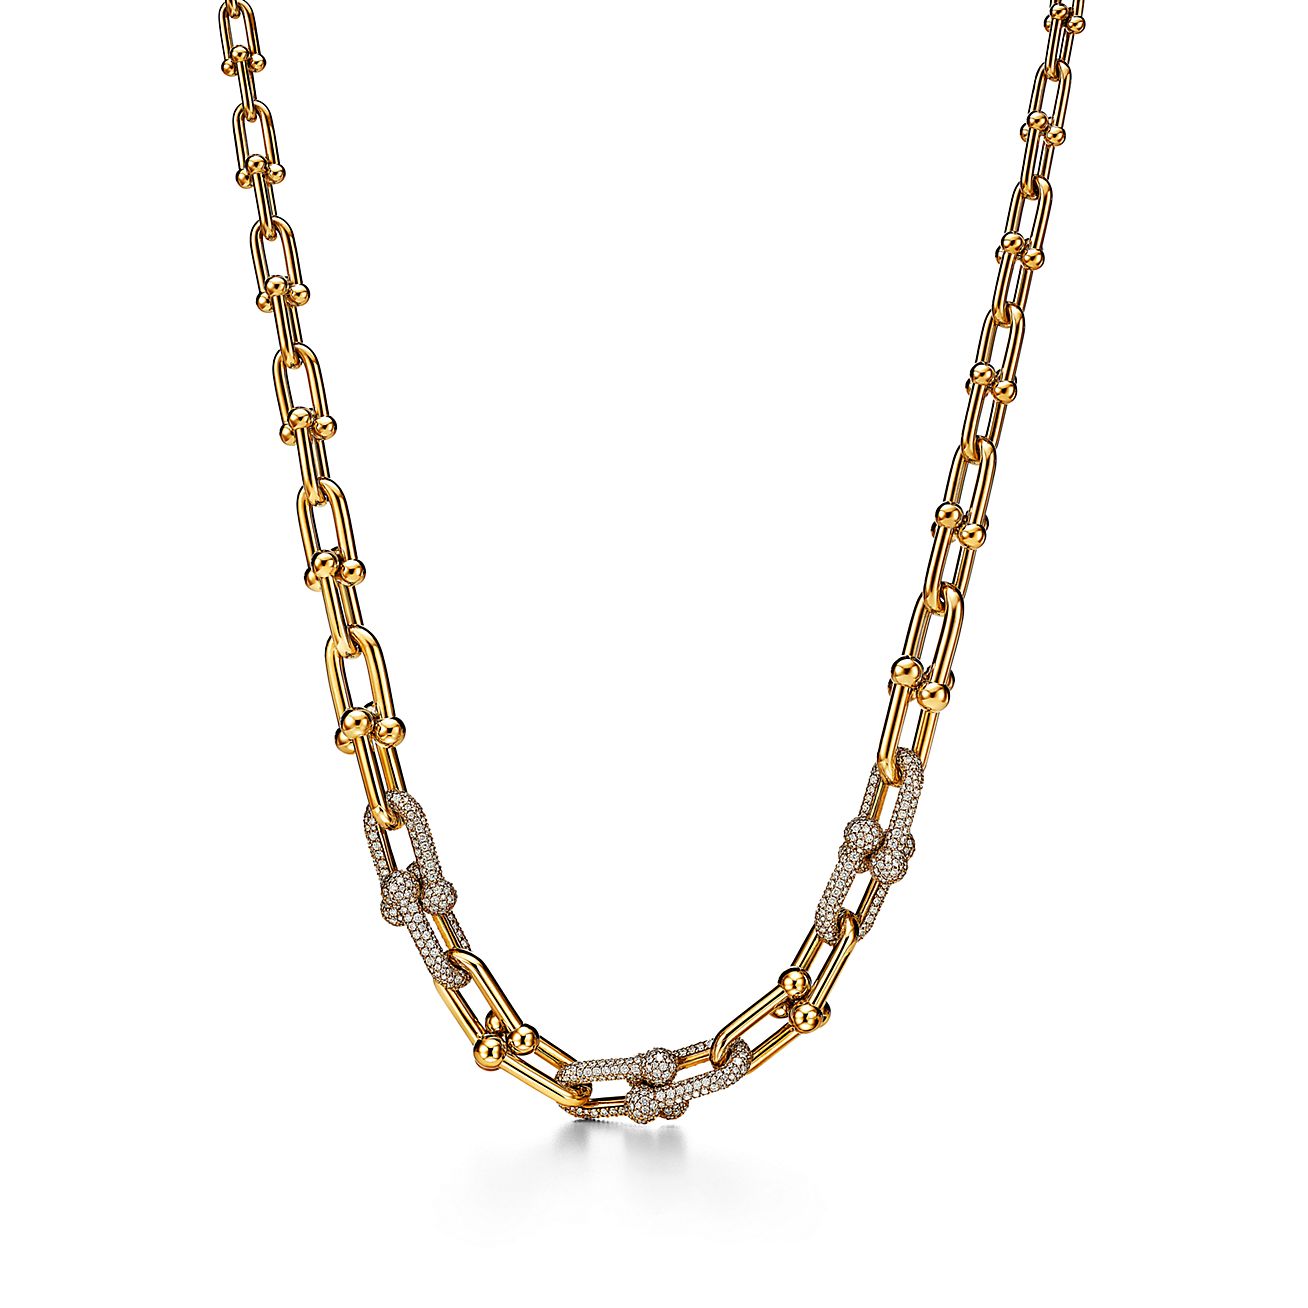 Tiffany HardWear Small Link Necklace in Yellow Gold | Tiffany & Co.-vachngandaiphat.com.vn